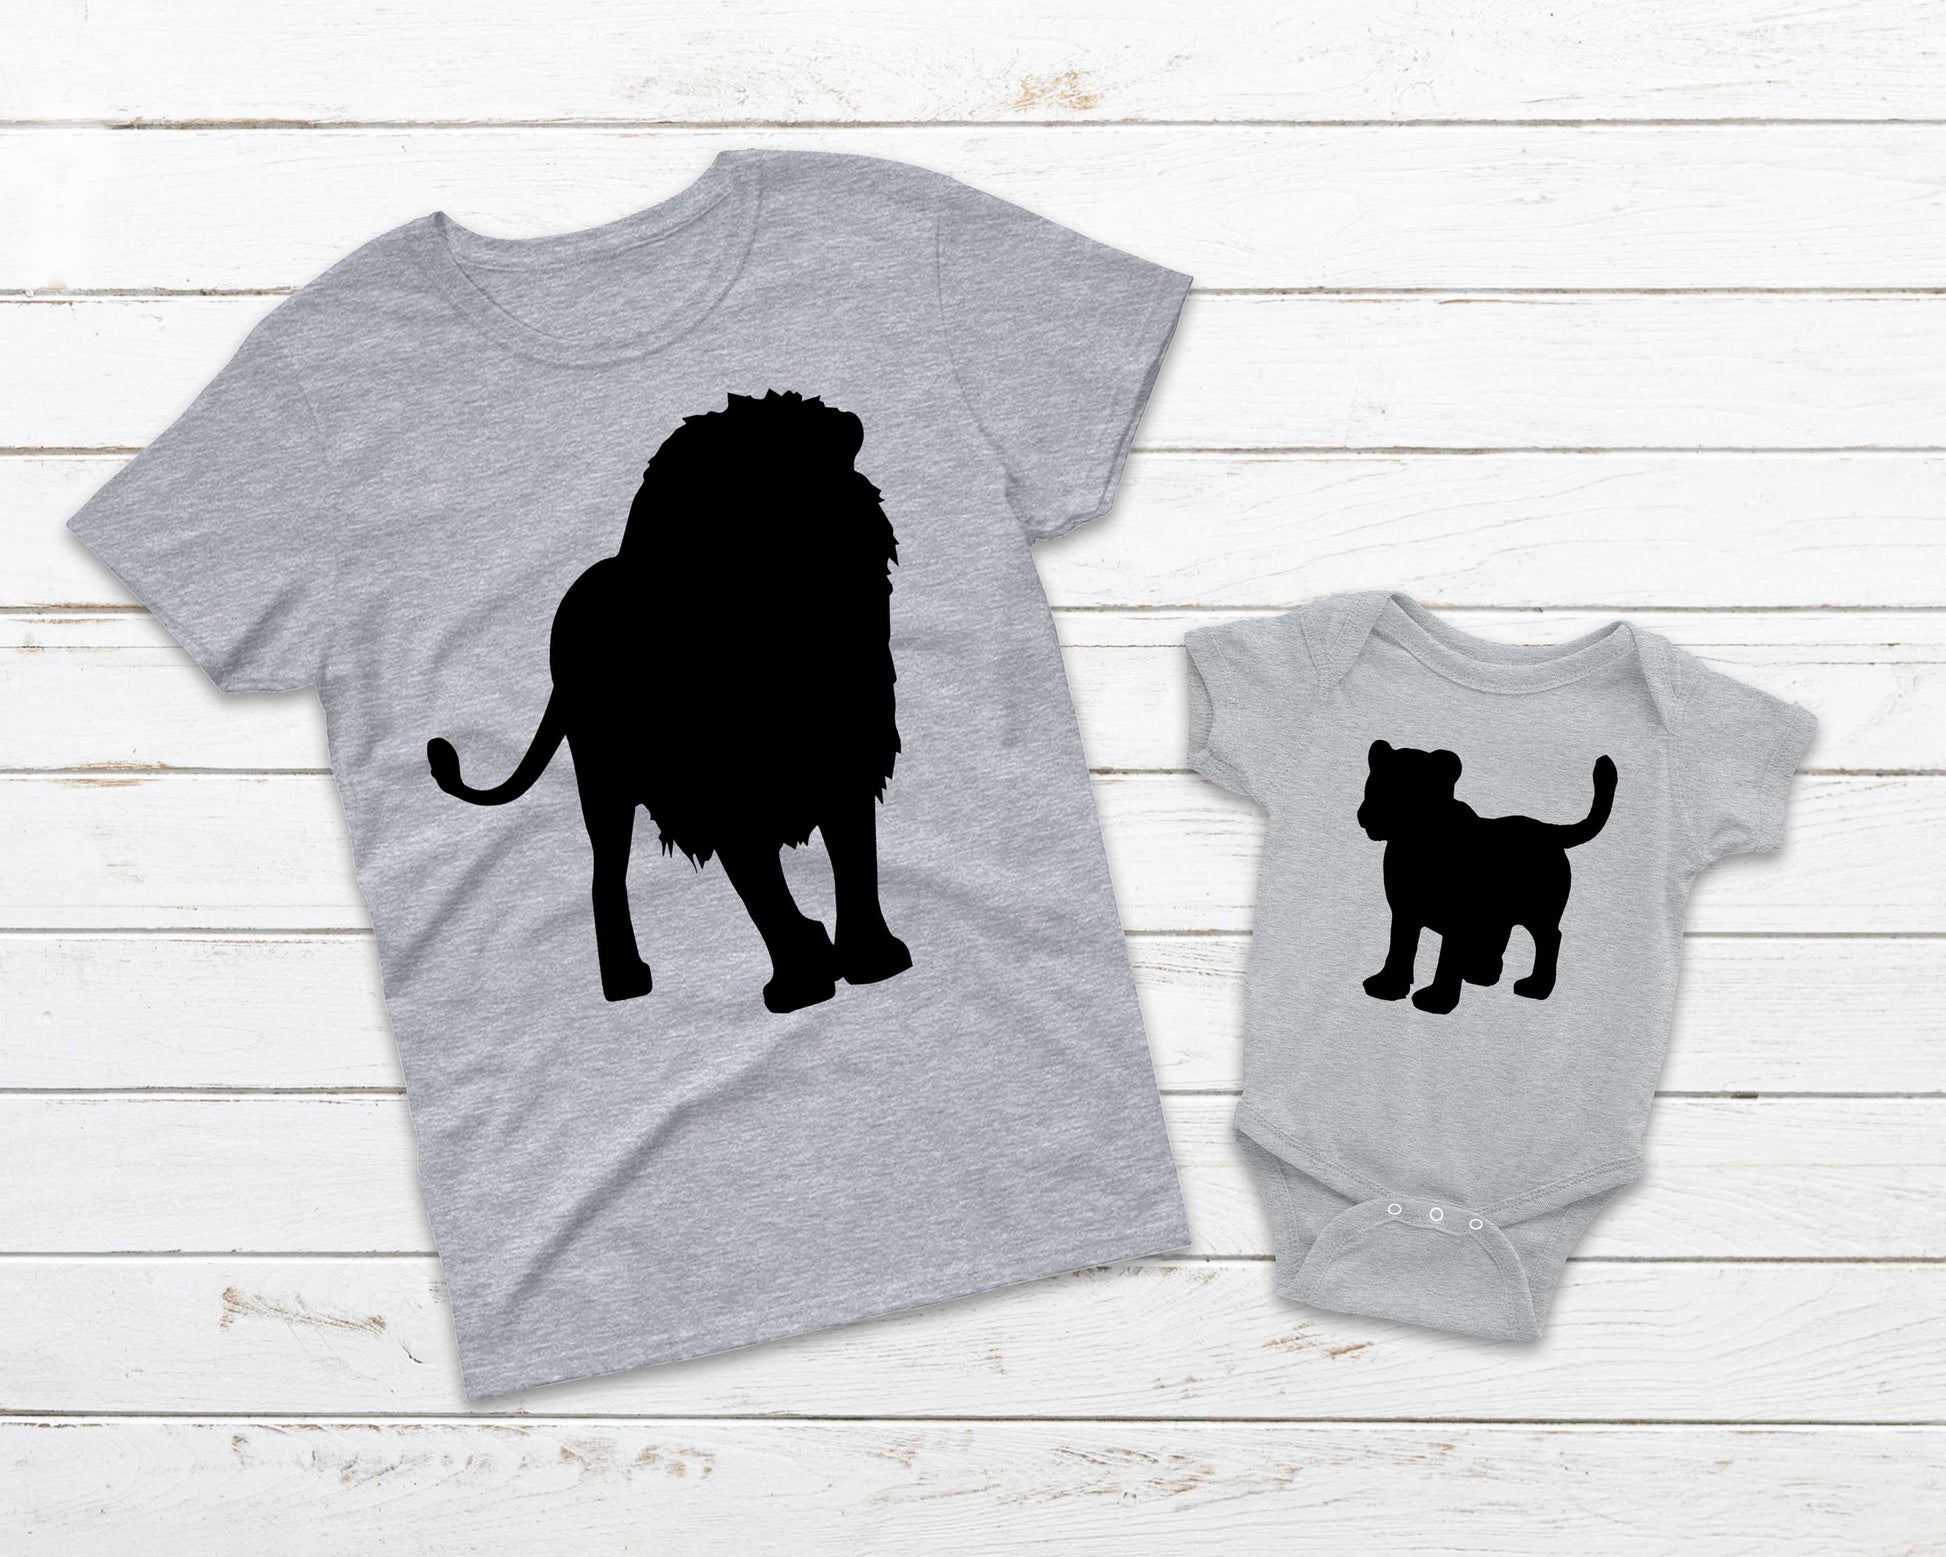 Daddy and Me Lion and Cub or Cubs Matching Father and Child Shirt Set -  Choose Your Sizes - Father's Day Shirts - Set of shirts - Custom Tee